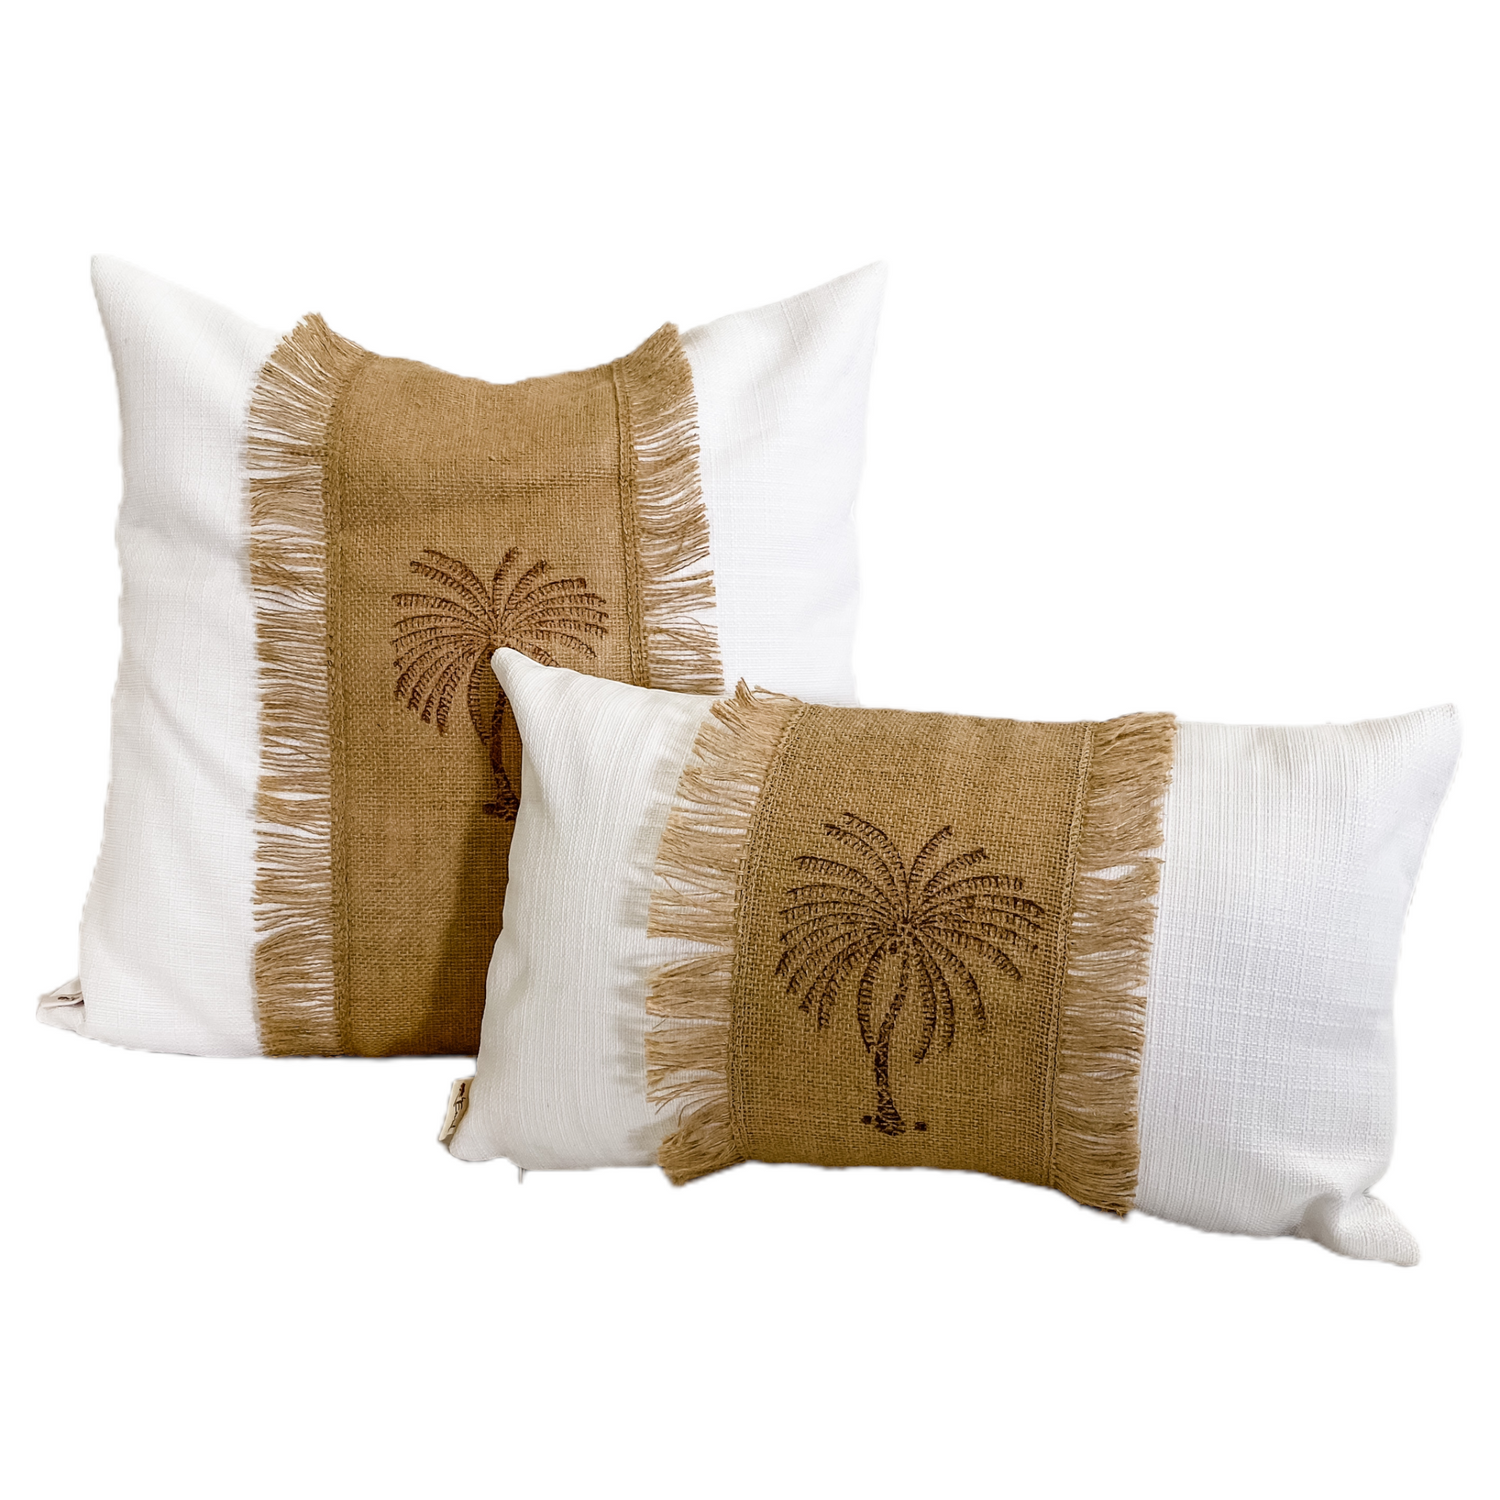 Stamped Palm Cushions